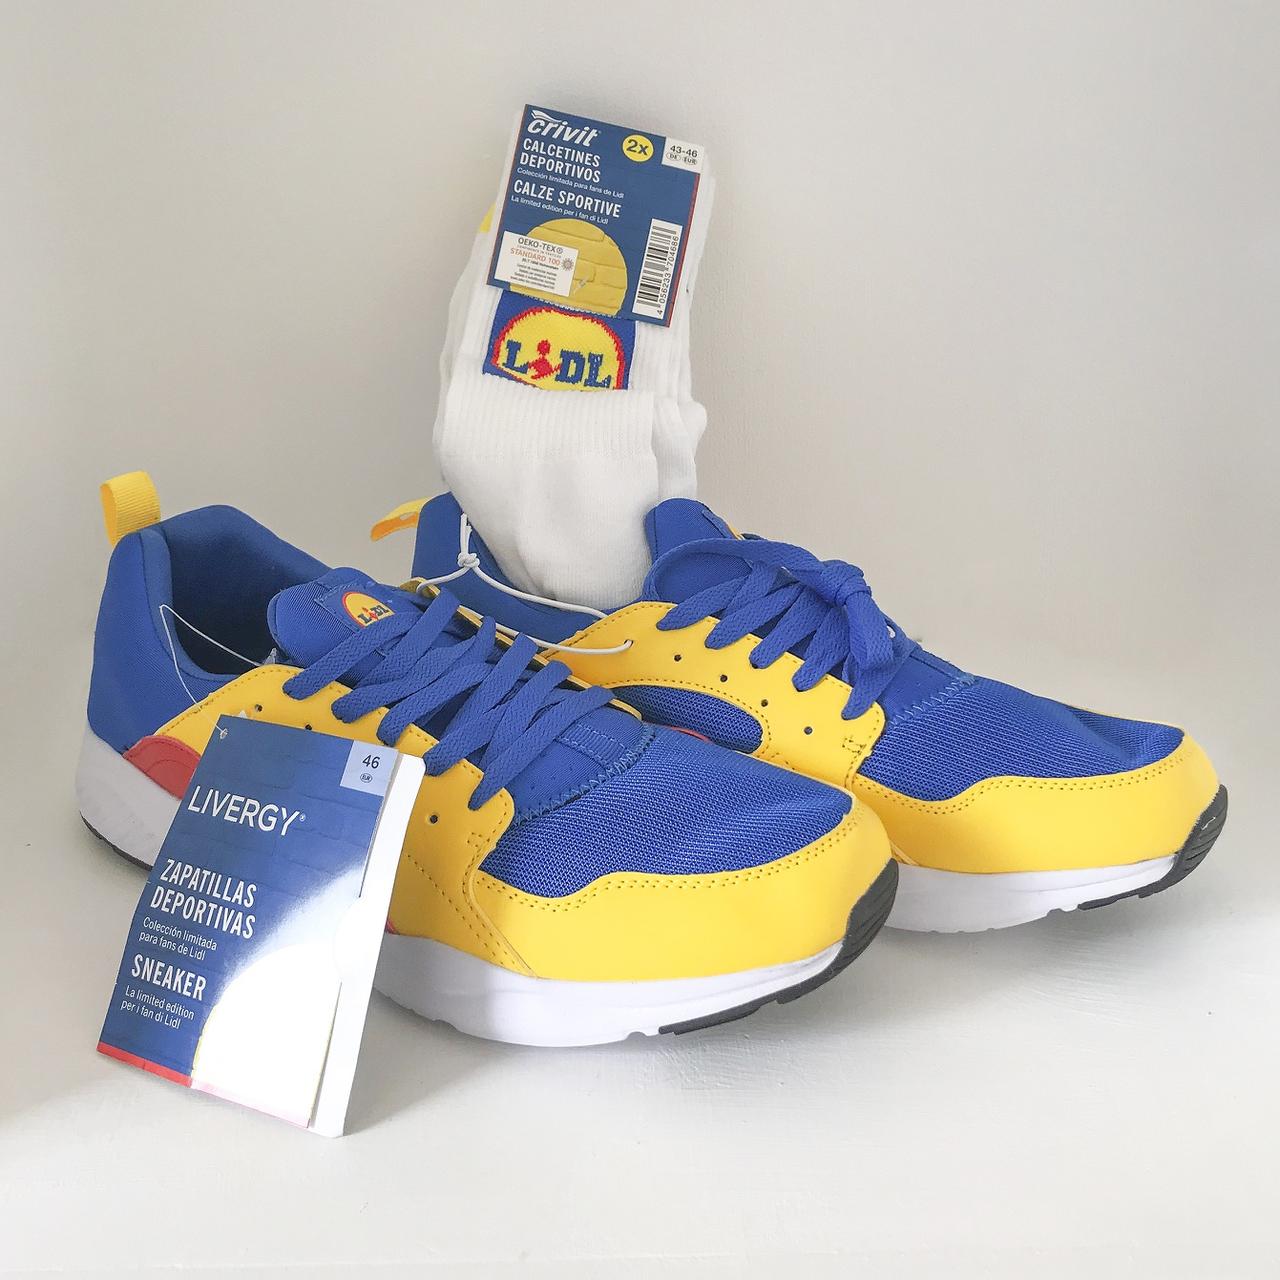 Lidl Sneaker, Lidl Fan Collection, Size 46, UK 11.5 LIMITED, NEW